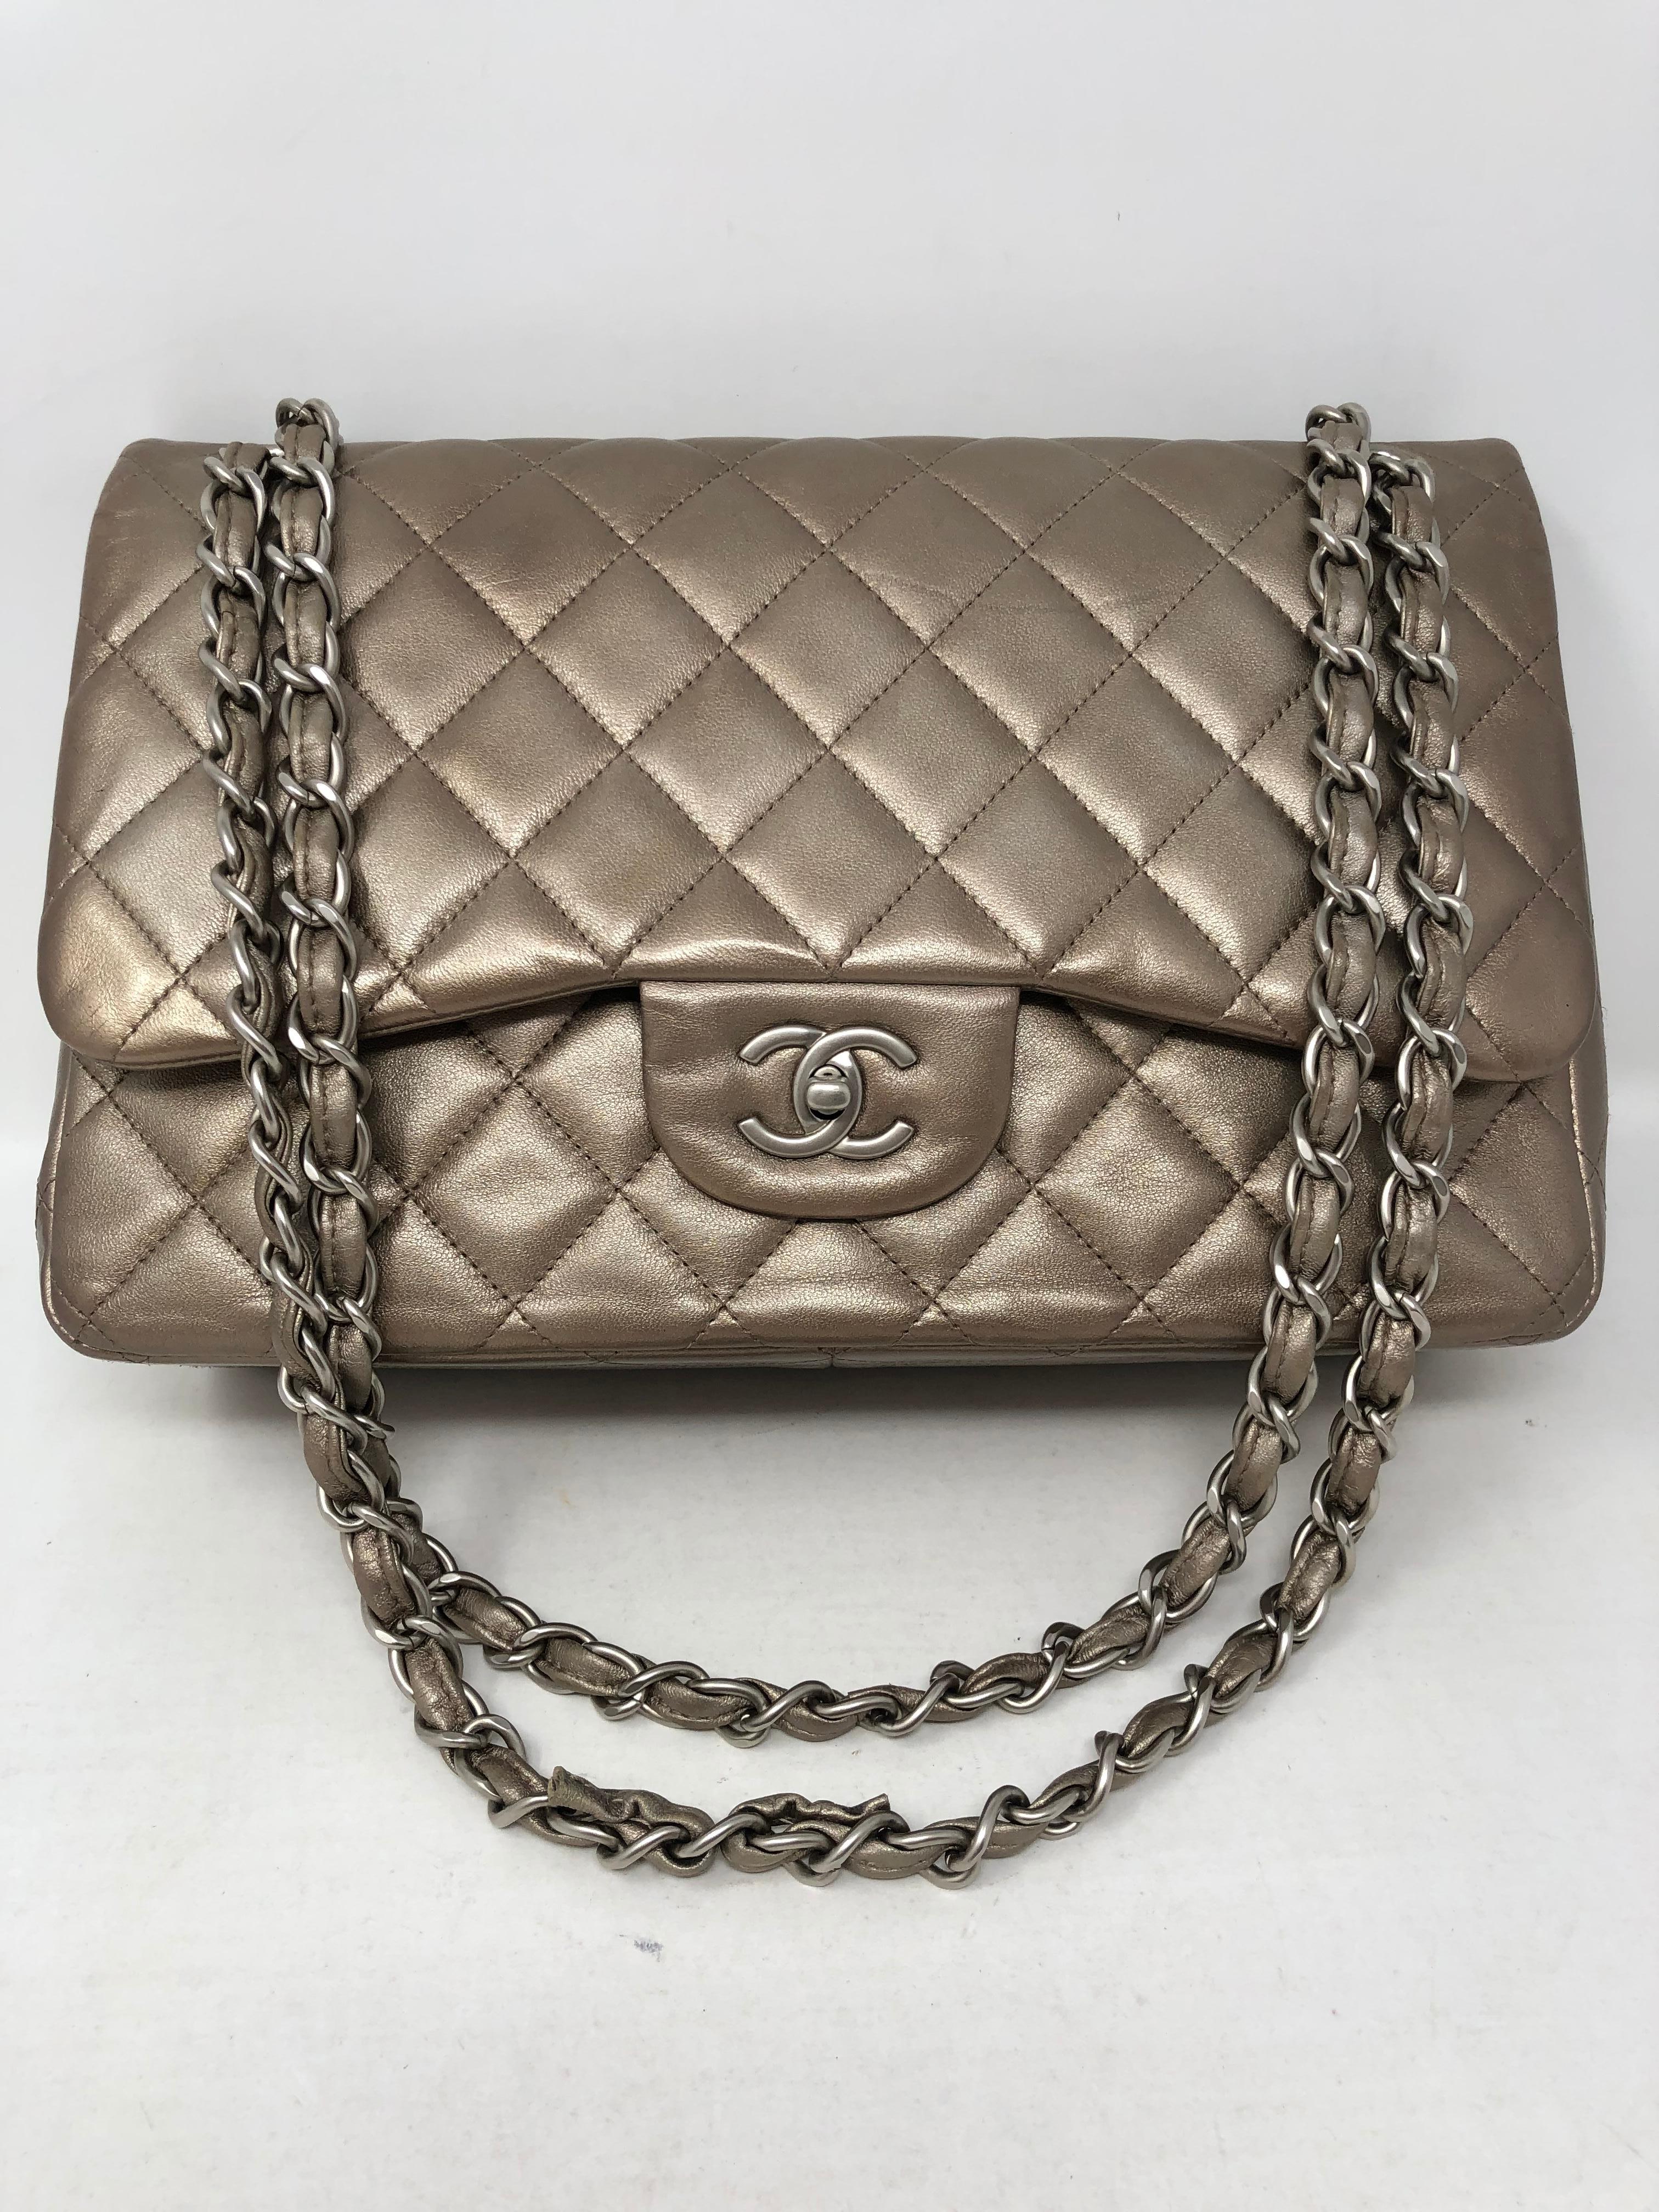 Chanel Jumbo Bronze Metallic in lambskin leather. Beautiful neutral color for all seasons. Silvertone with bronze color. Silver hardware. Good condition on exterior. Inside pocket has a slight tear. Bag can be worn doubled or as a crossbody.